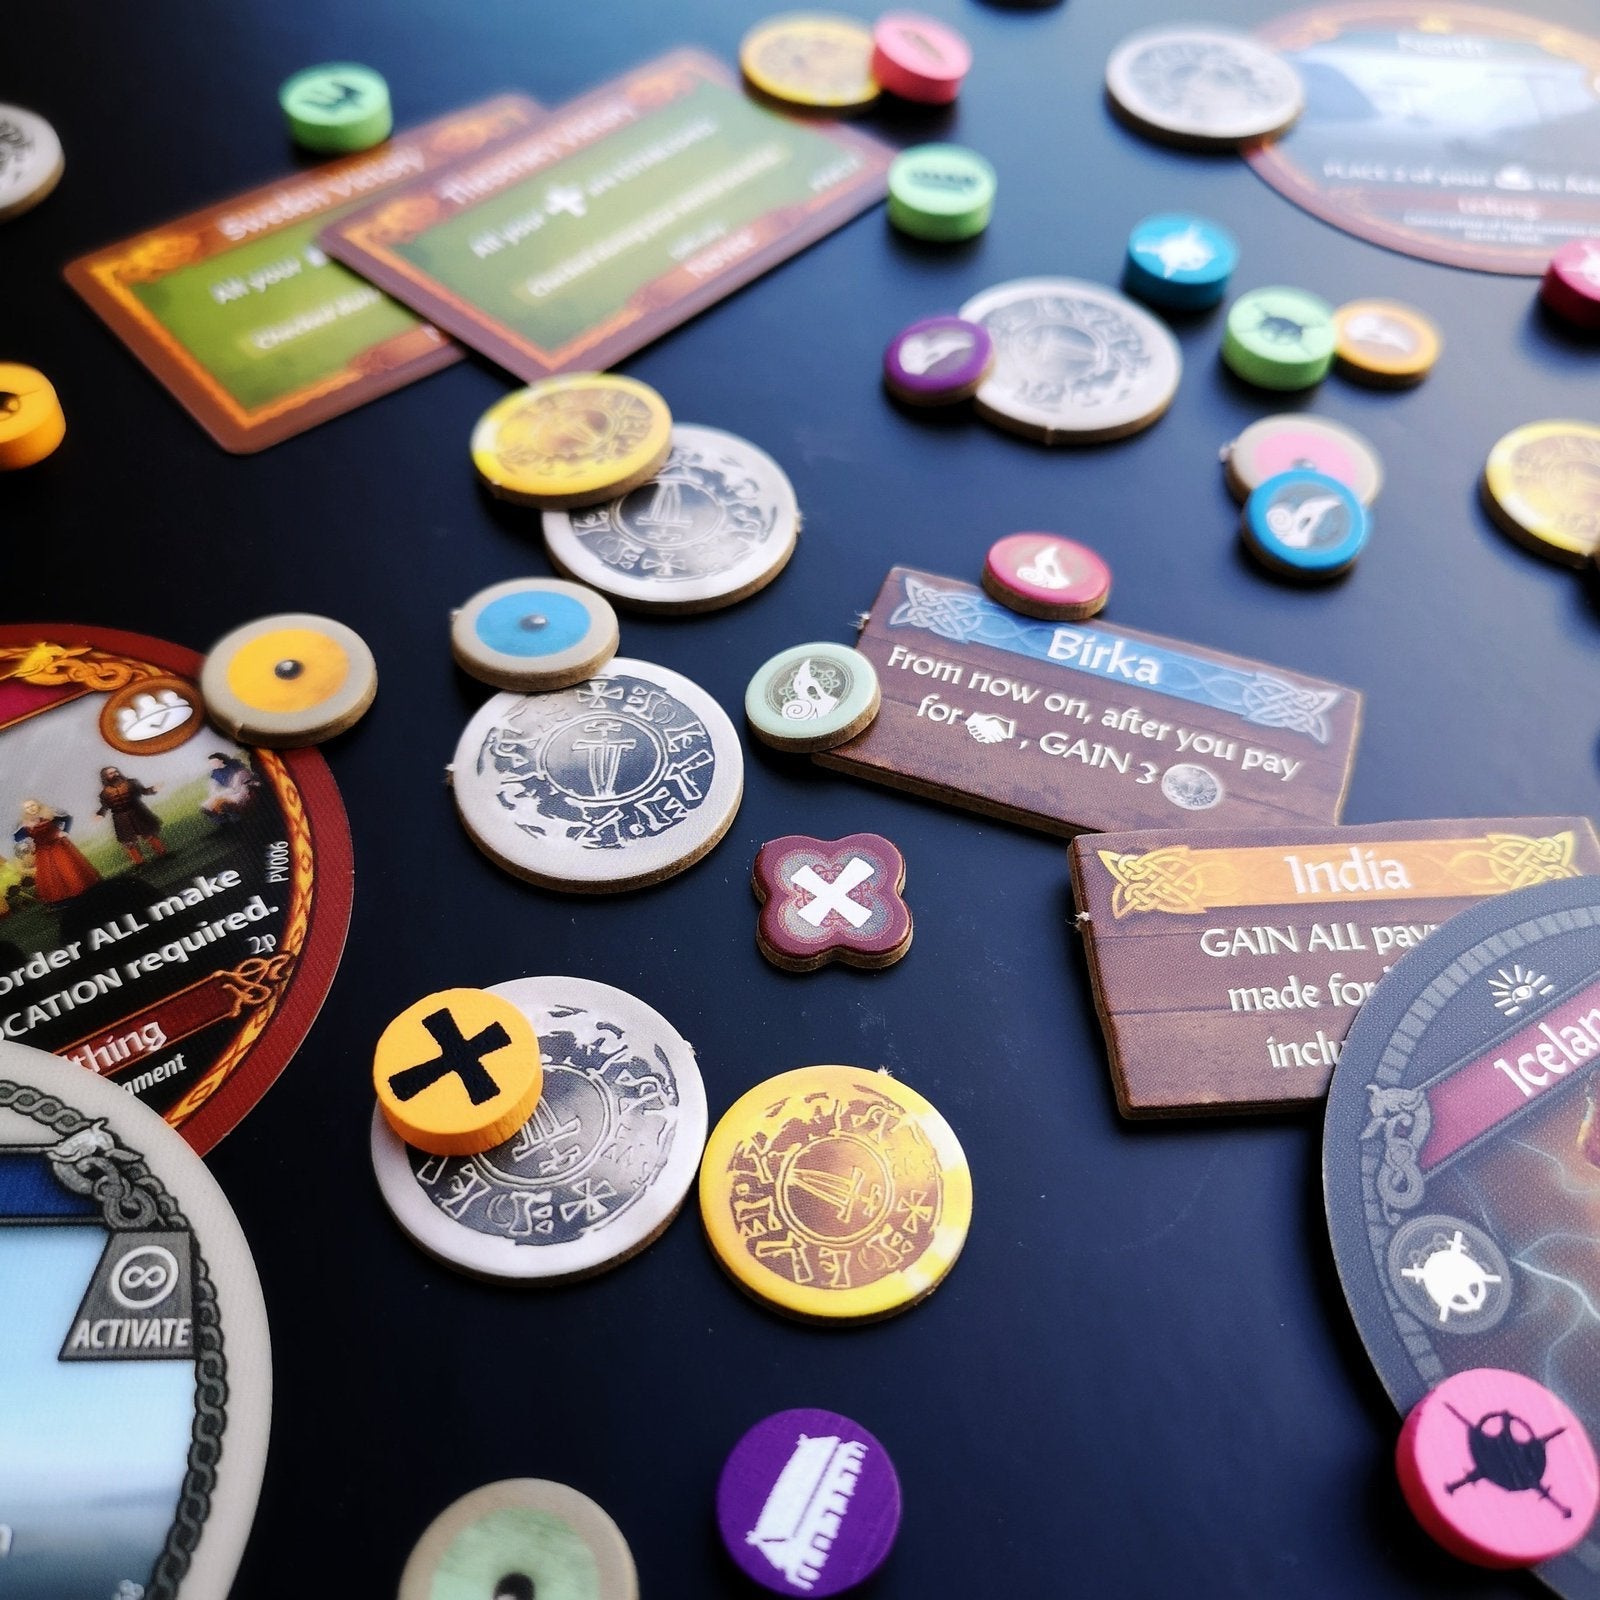 PAX Viking Board Game - Expanded view of game tokens